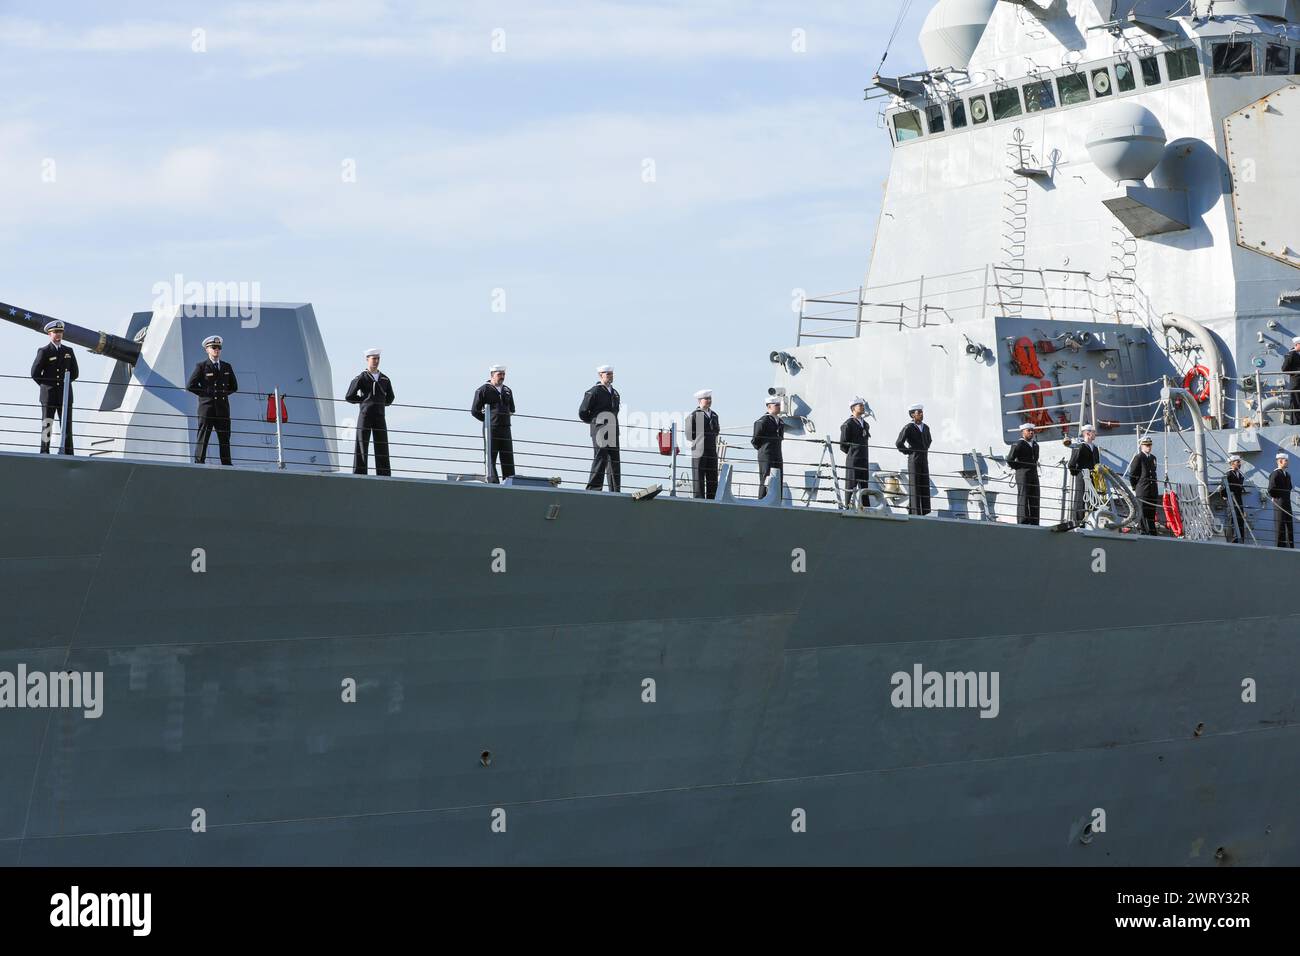 240314-N-ZV473-1027 BOSTON (Mar. 14, 2020) USS Truxtun (DDG 103) Sailors man the rails as the ship arrives in Boston, Mar. 14, 2024, to attend the city's famous Evacuation Day and St. Patrick's Day celebrations. USS Truxtun is one of over 70 ships that make up Commander, Naval Surface Force Atlantic's fleet. COMNAVSURFLANT mans, trains and equips assigned surface forces and shore activities, ensuring a capable force for conducting prompt and sustained operations in support of United States national interests. (US Navy photo by Mass Communication Specialist 1st Class Emily Casavant) Stock Photo